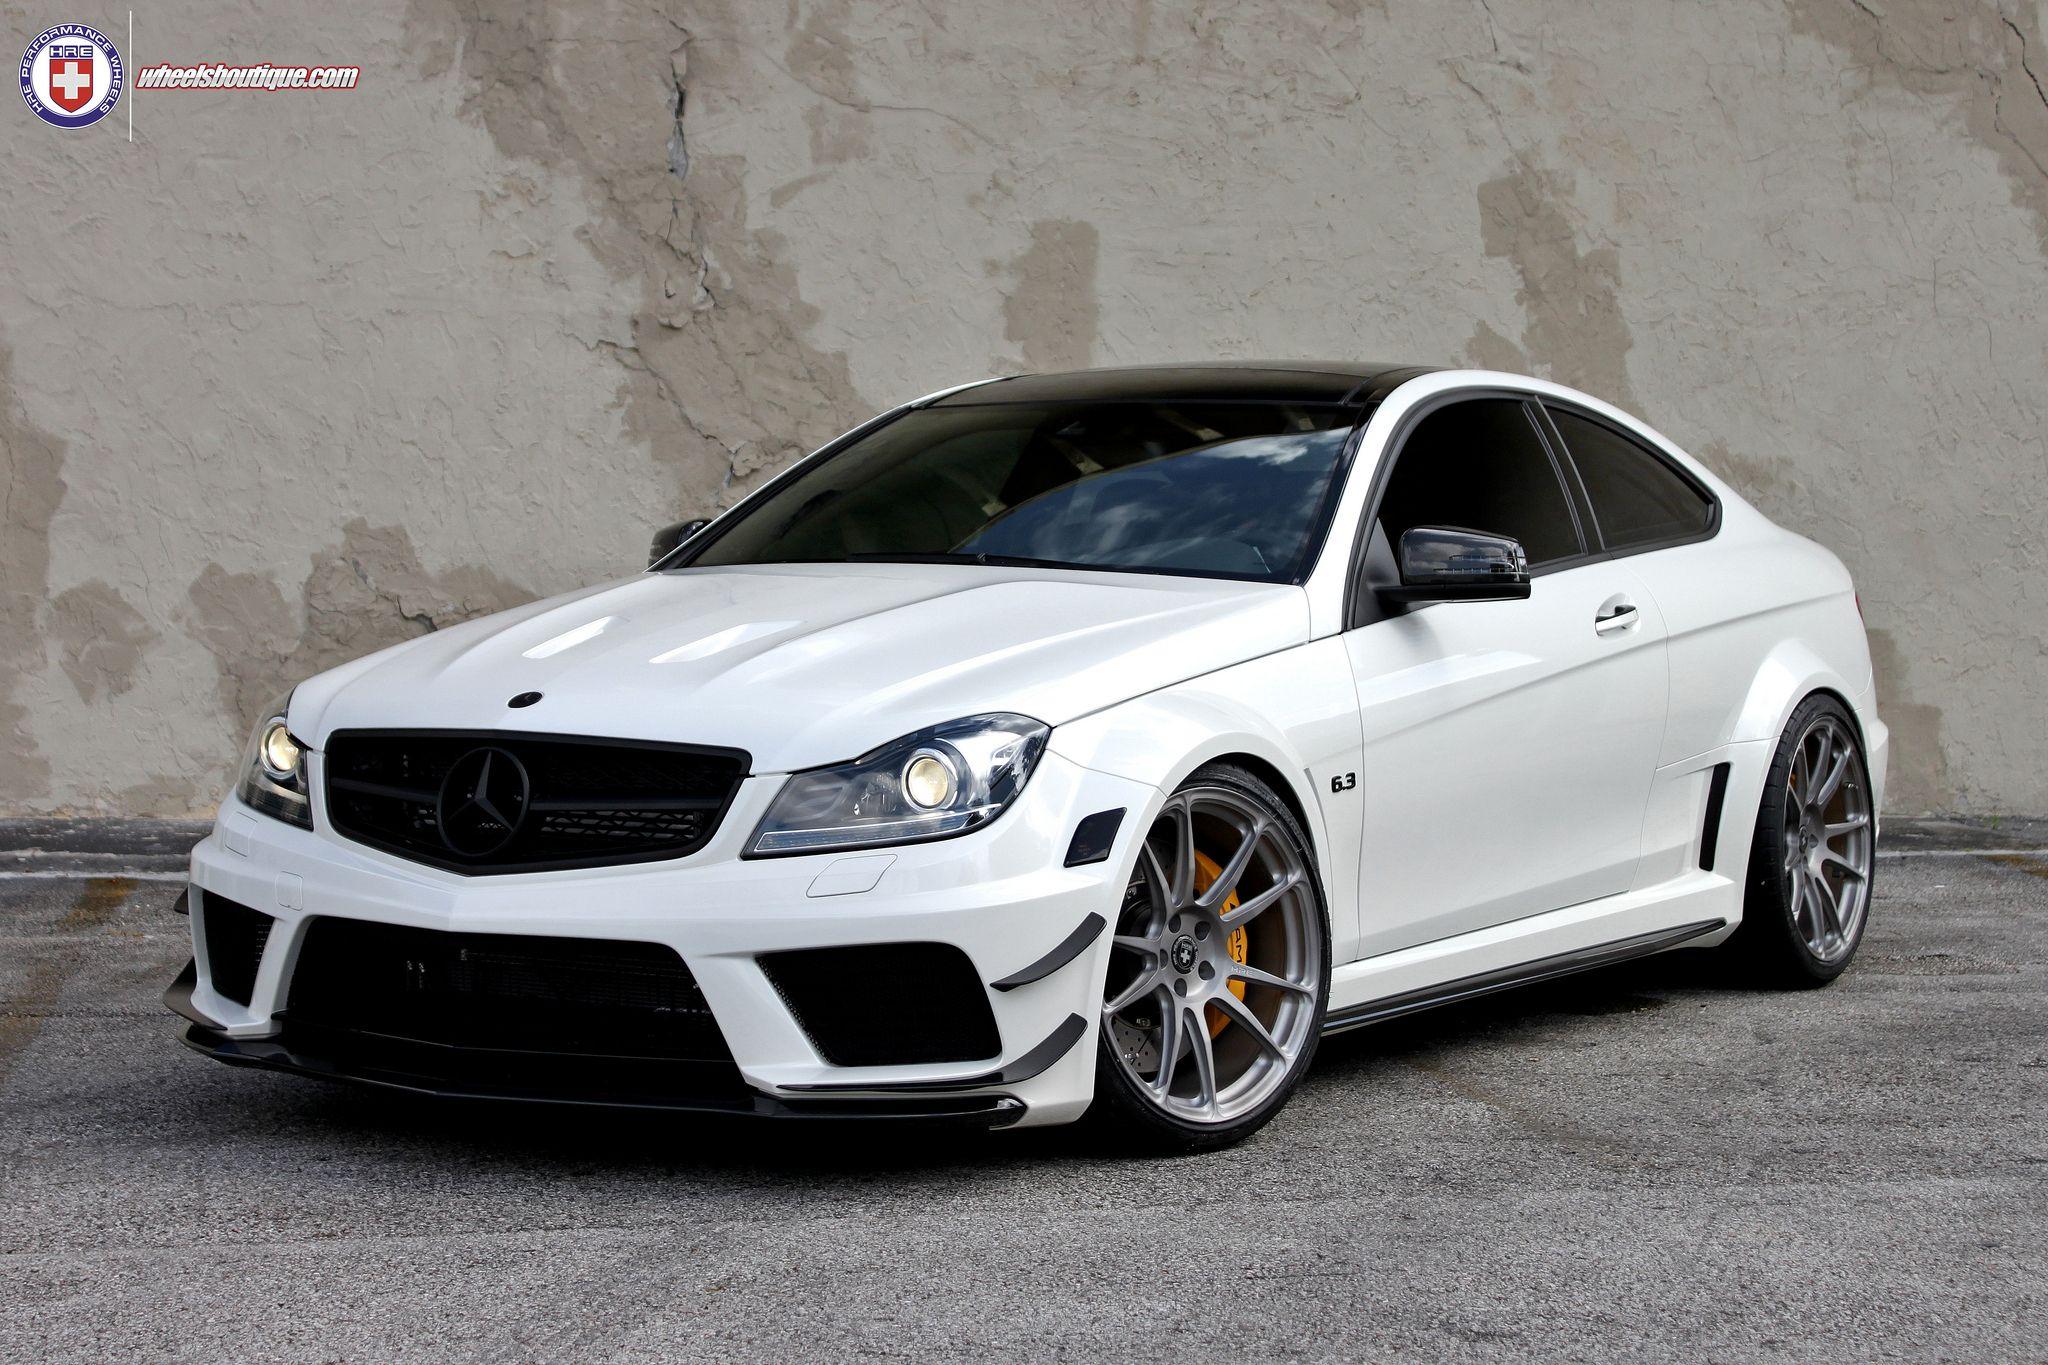 1600x1067px Wide HDQ C63 Amg wallpaper 61